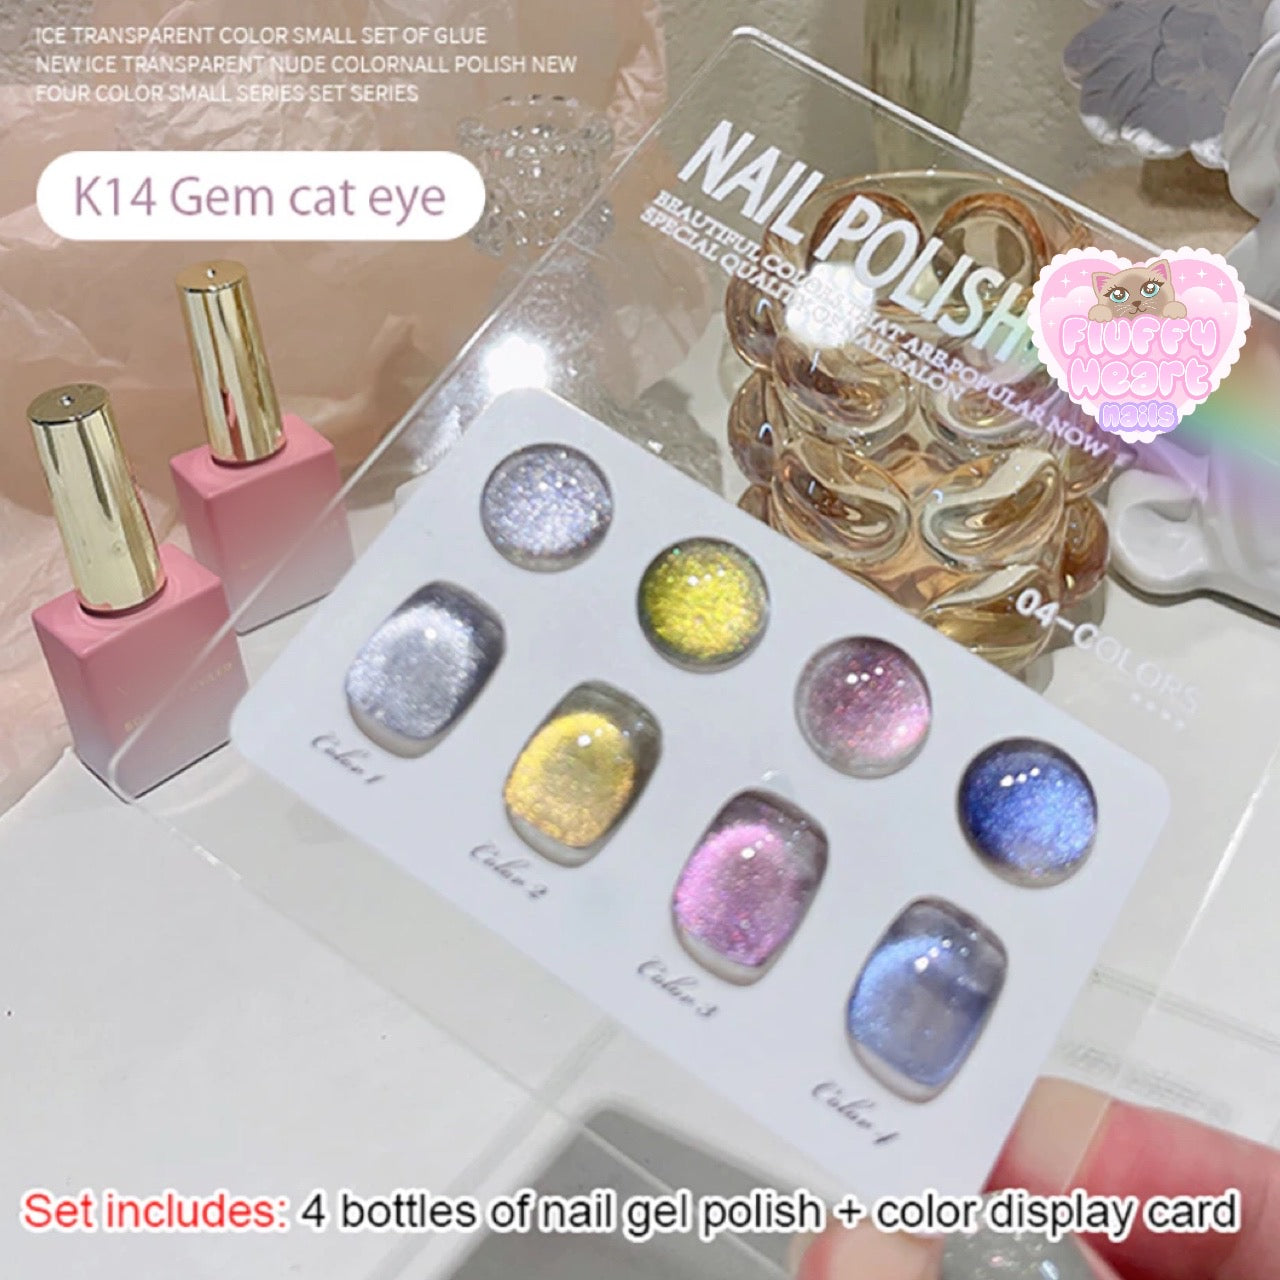 ADJD Best Shine Pigmented & Long Stay Unique Transparent Nail Paint  TARNSPARENT - Price in India, Buy ADJD Best Shine Pigmented & Long Stay  Unique Transparent Nail Paint TARNSPARENT Online In India,